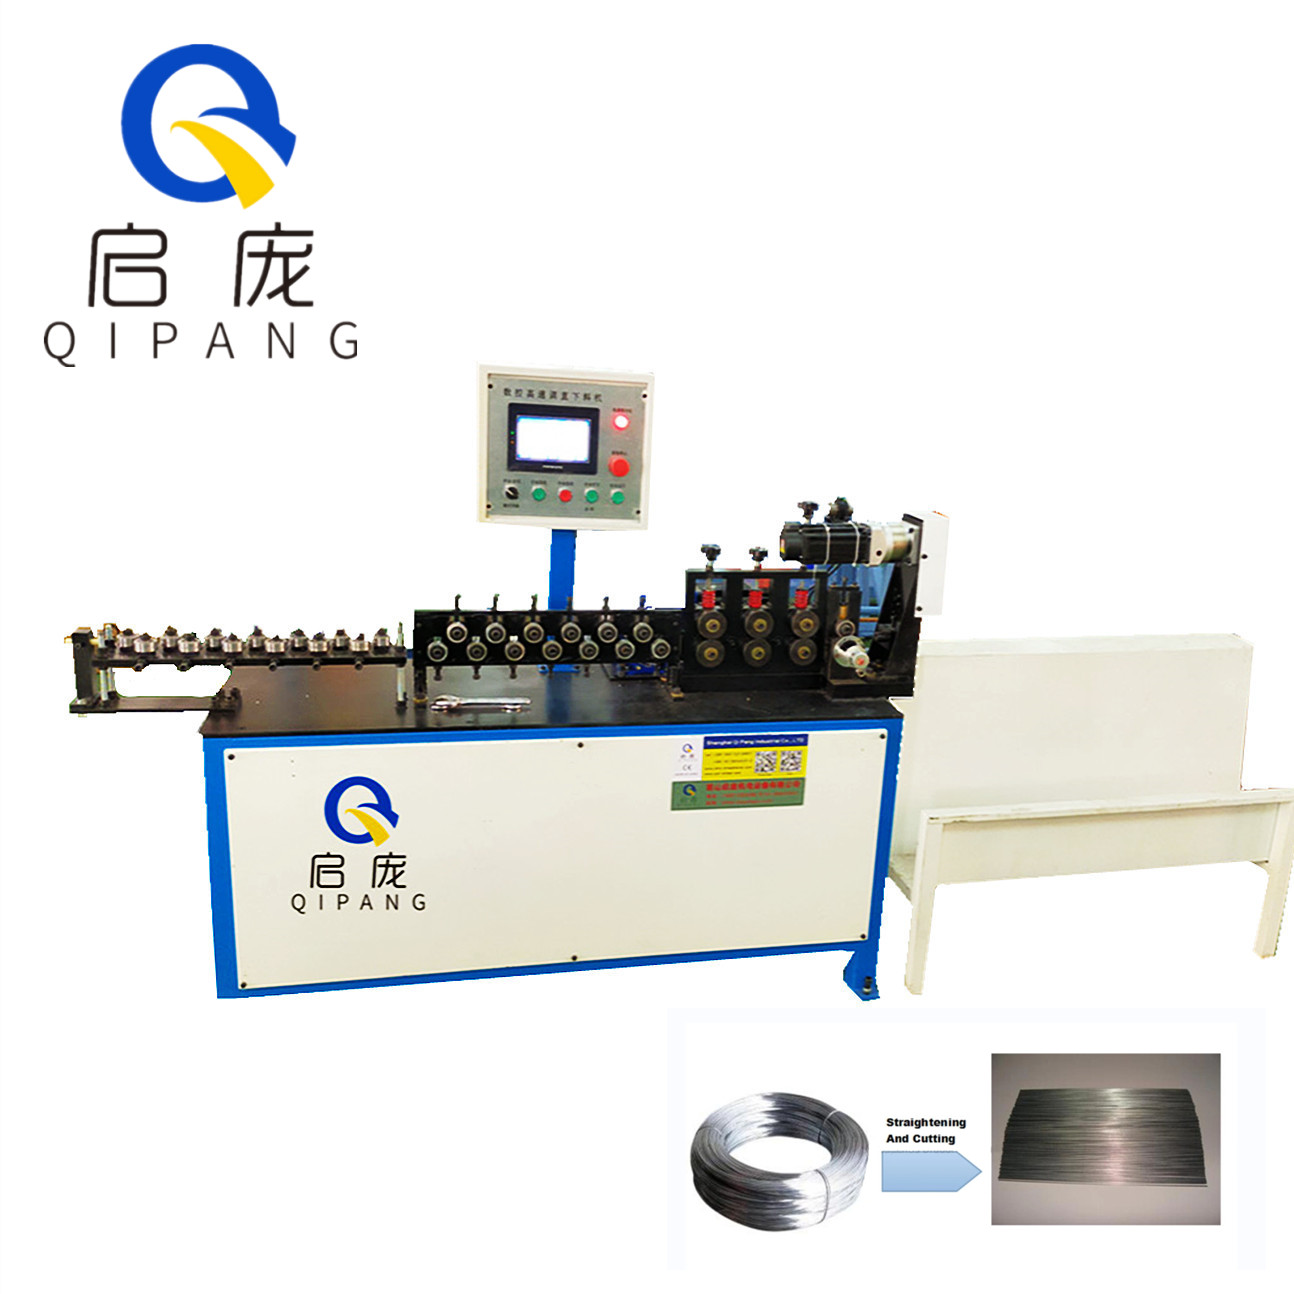 QIPANG High speed wire straightening and cutting machine for Copper wire